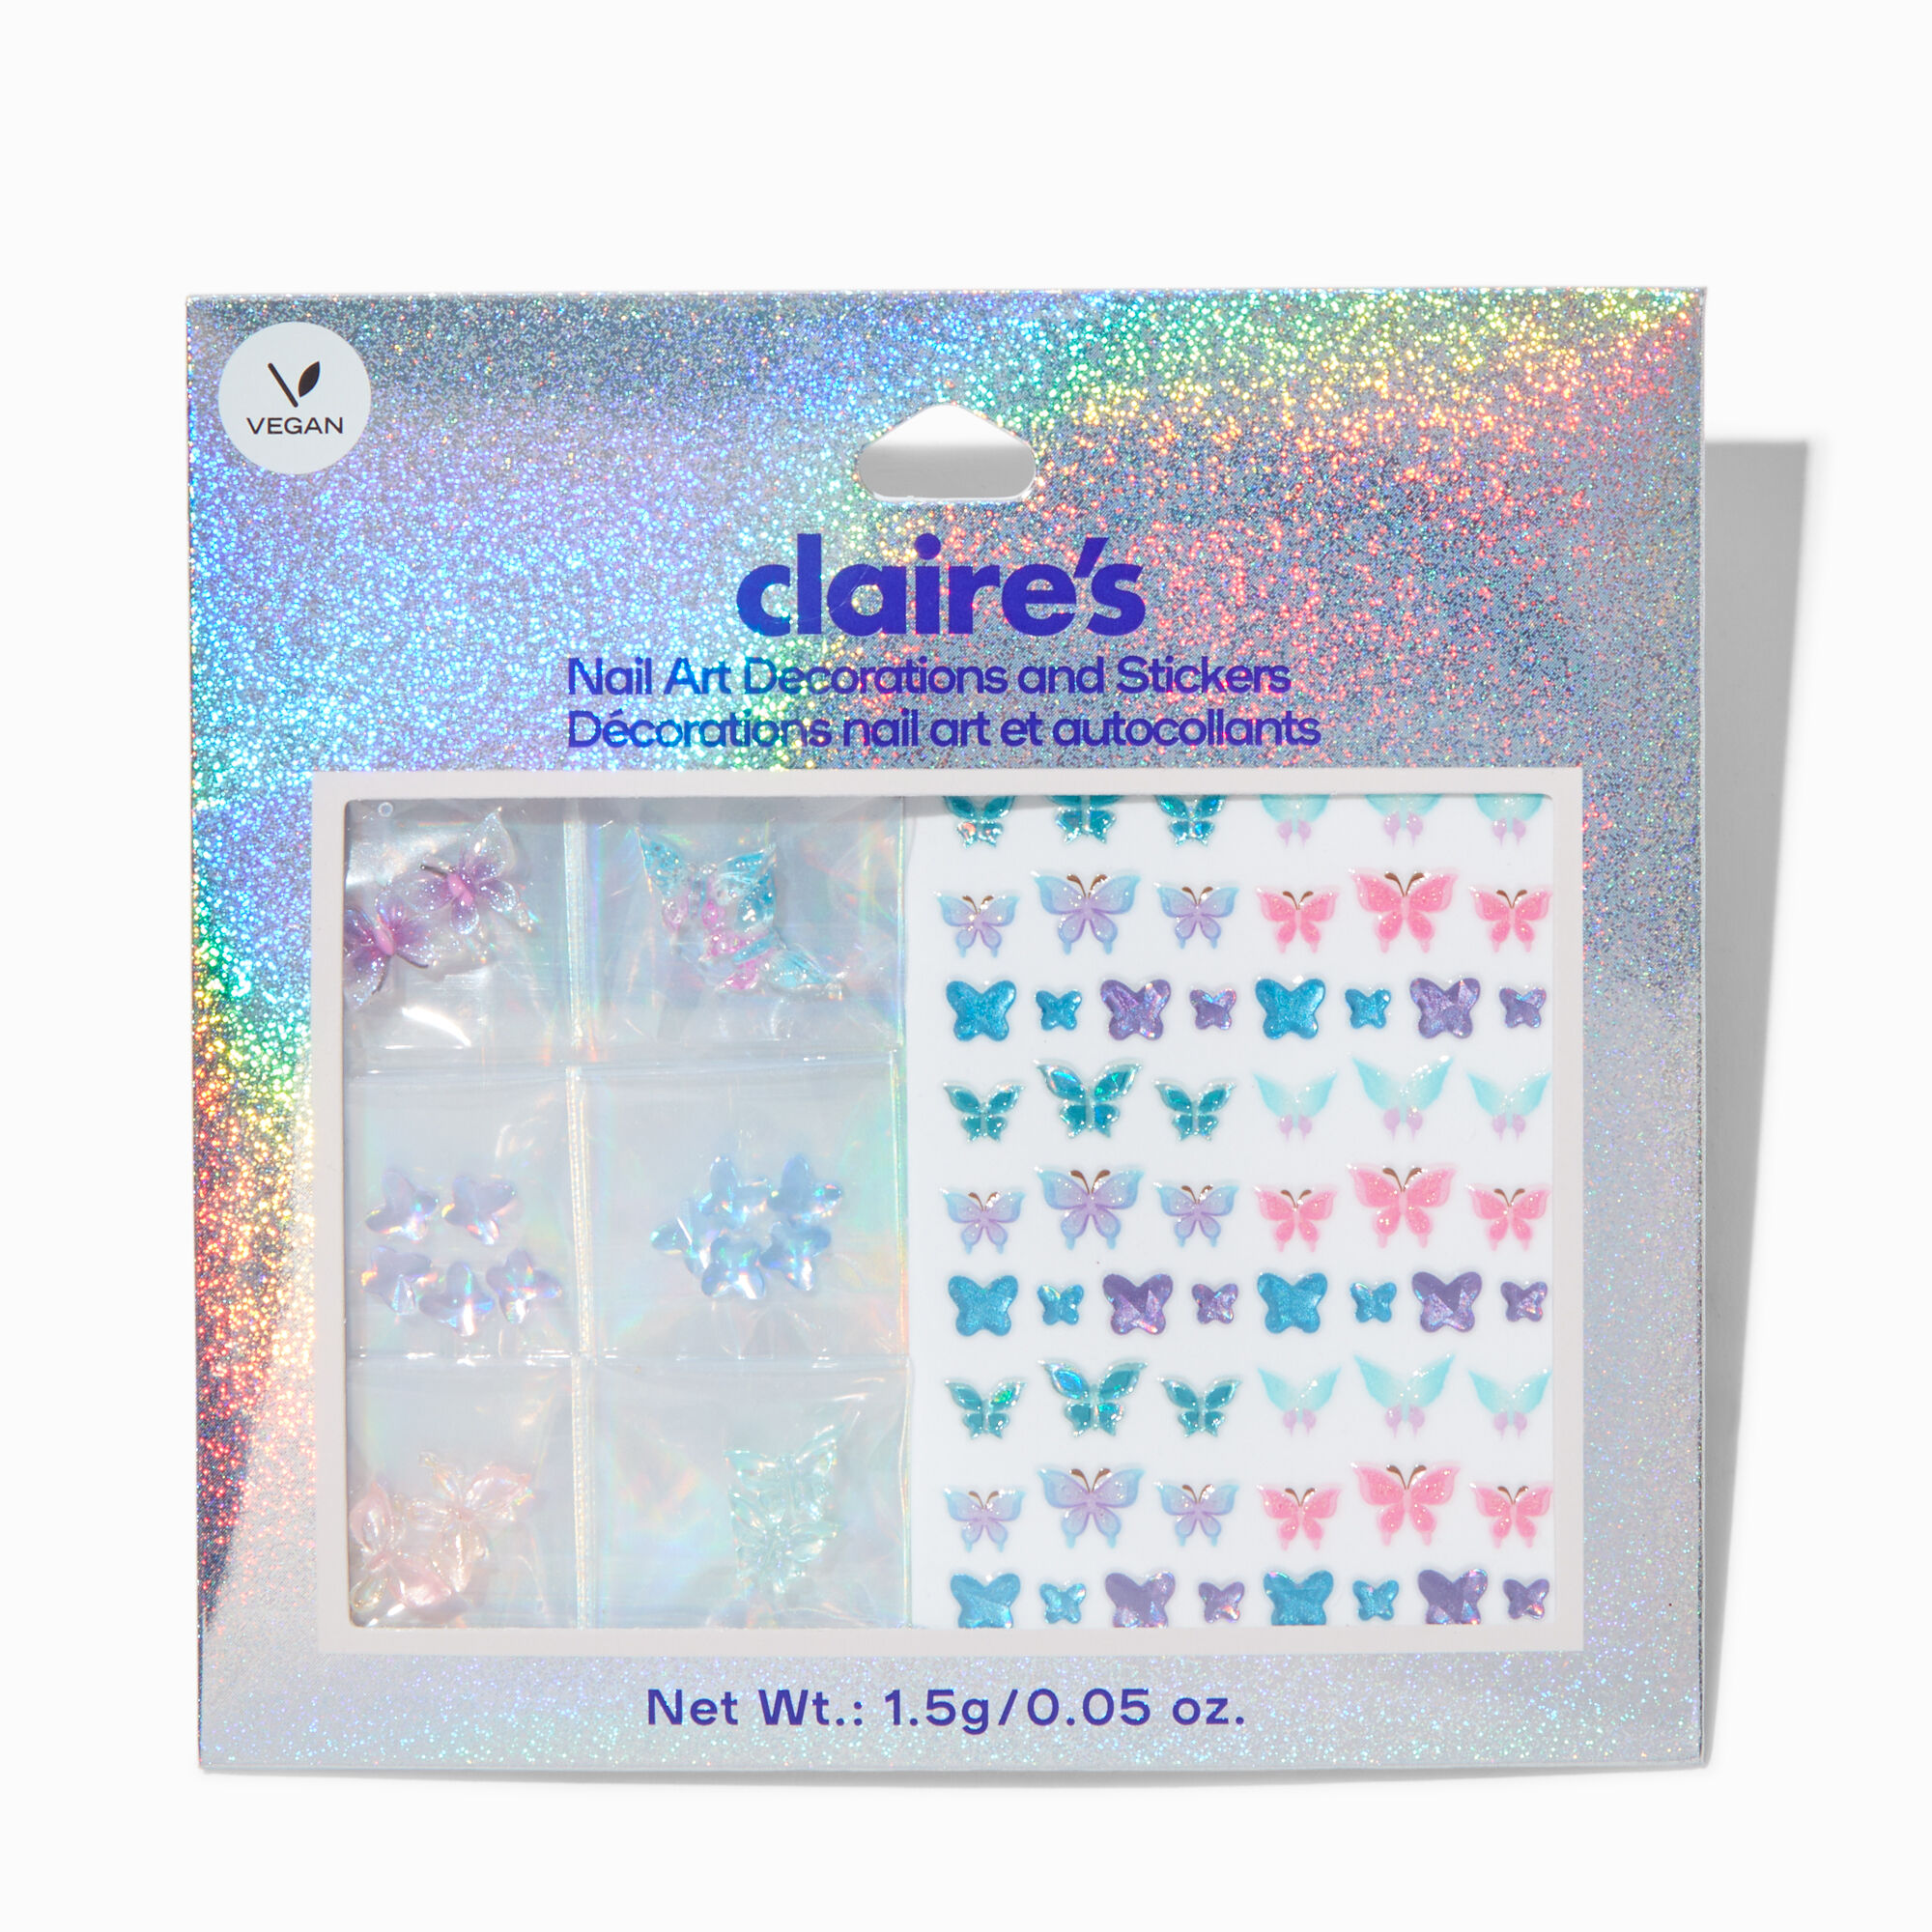 View Claires Butterfly Gem Nail Art Starter Kit information